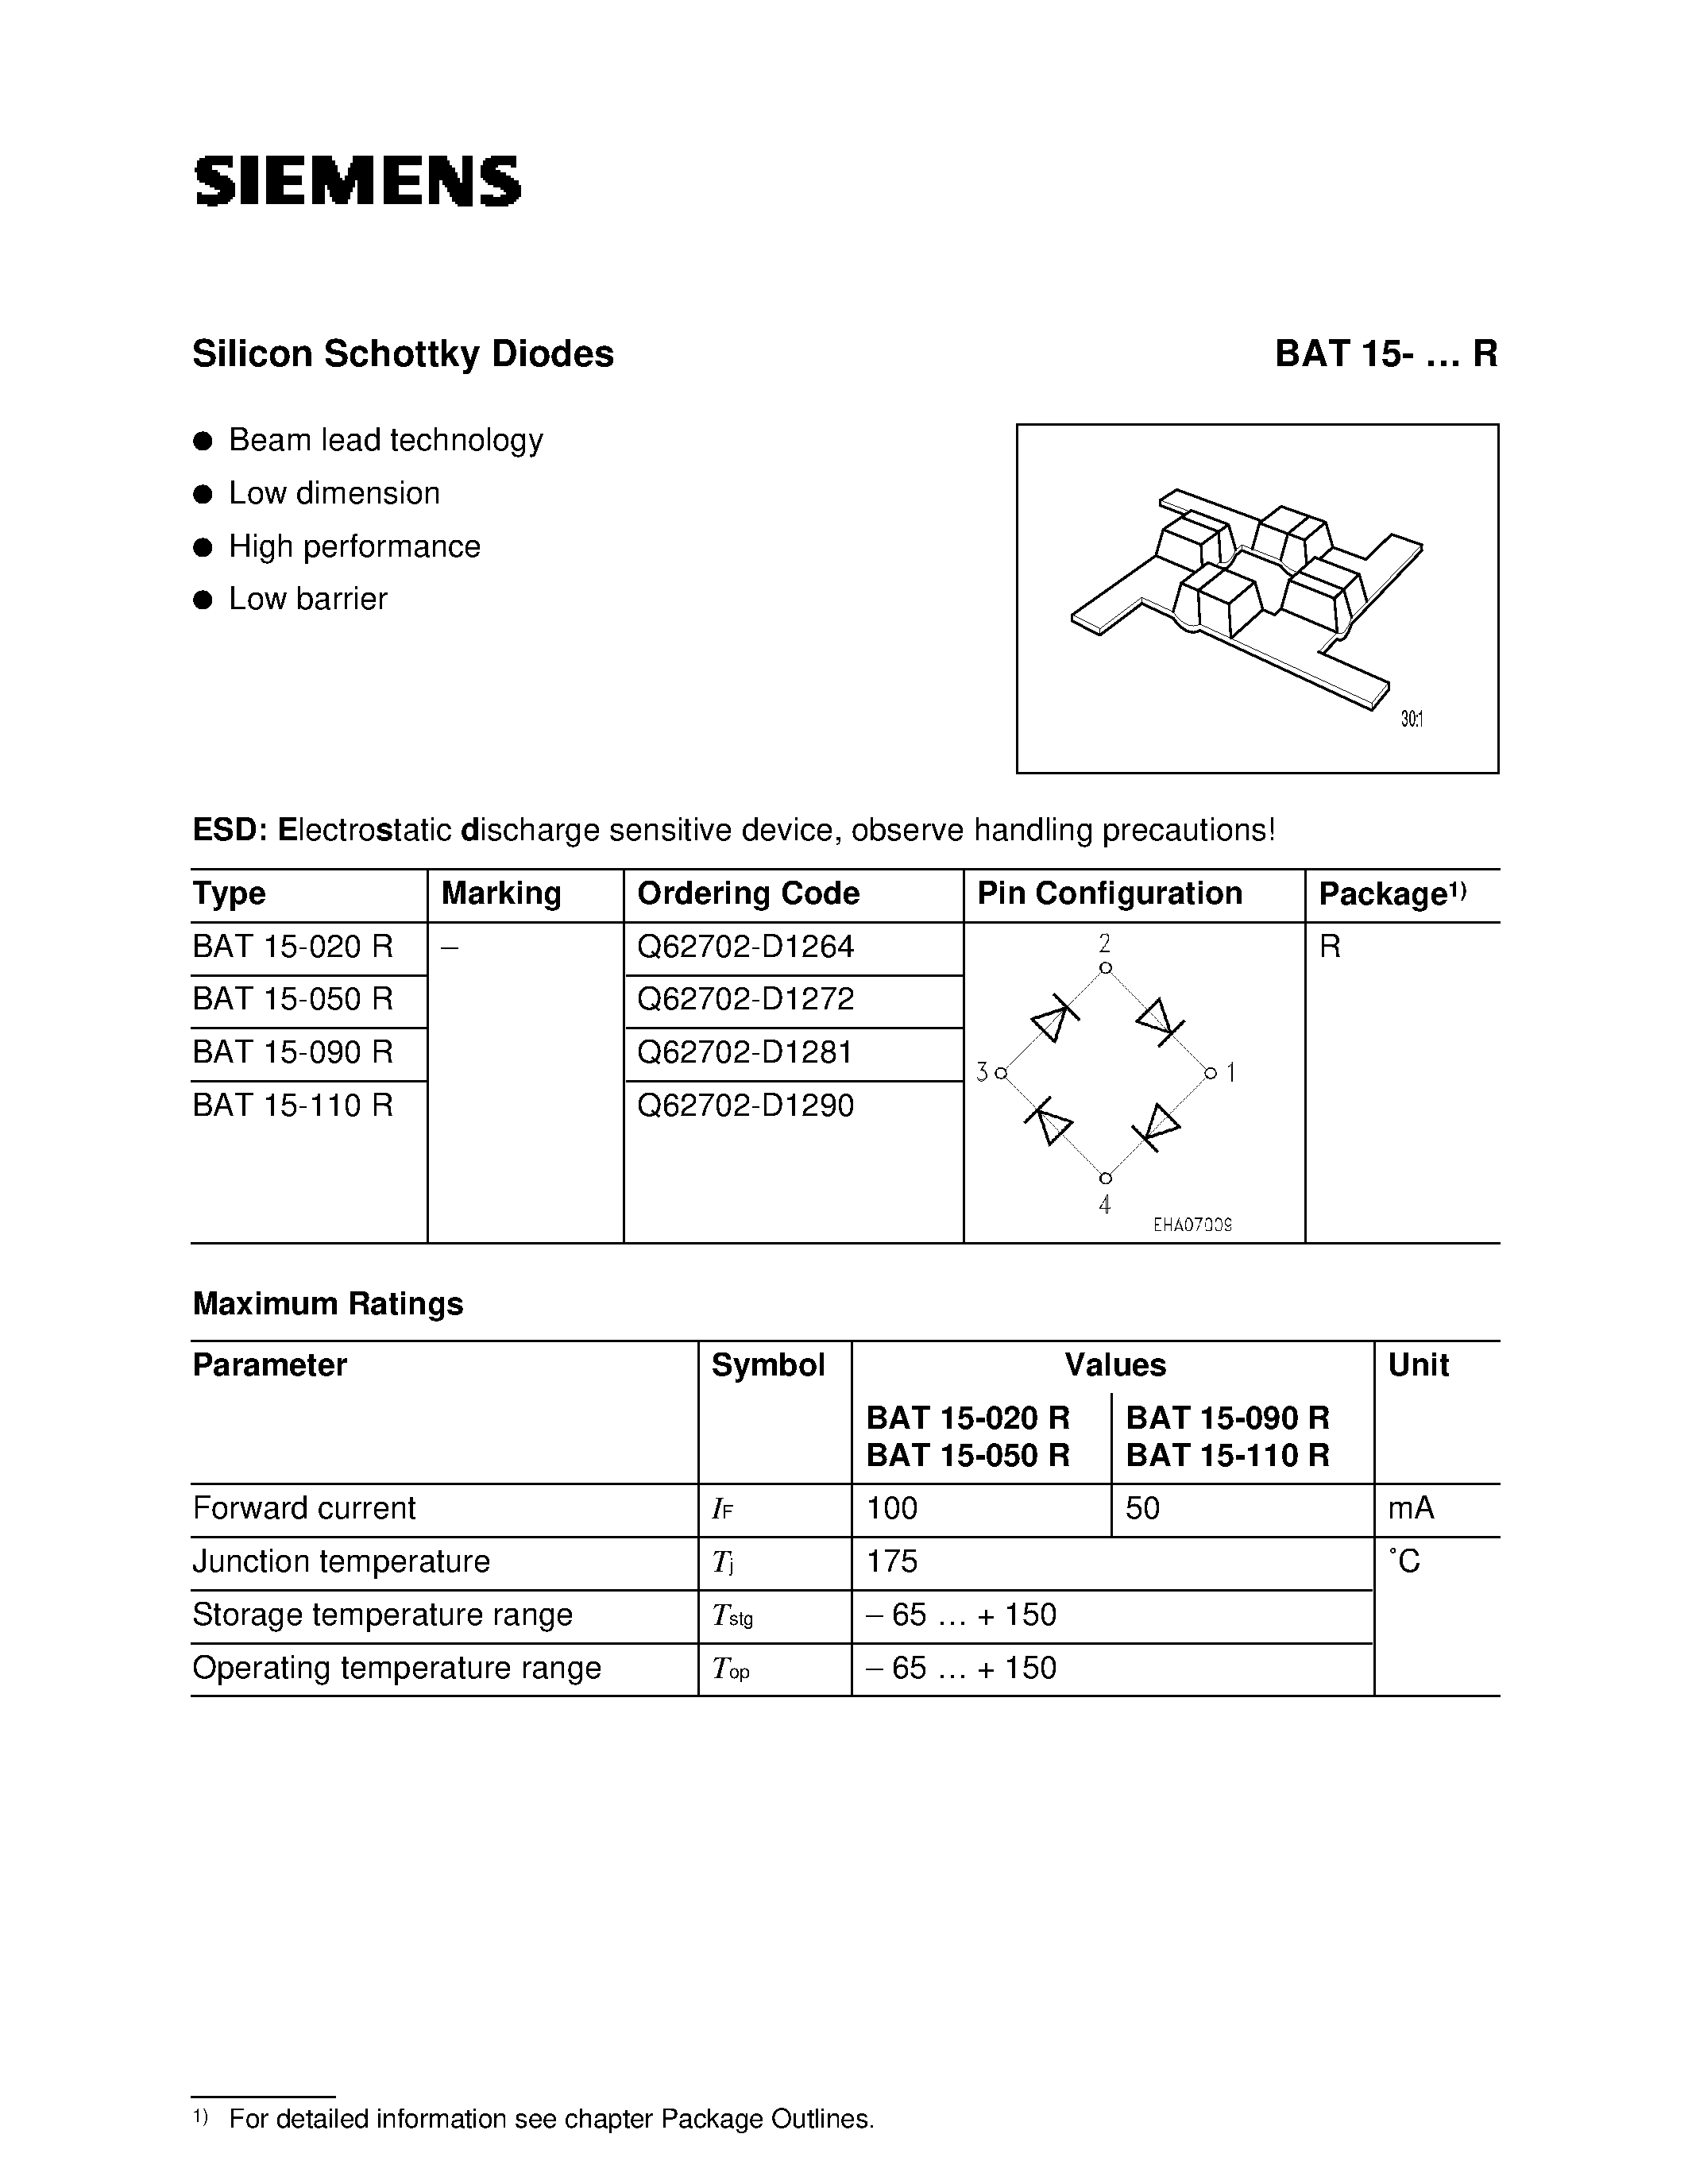 Datasheet BAT15-020R - Silicon Schottky Diodes (Beam lead technology Low dimension High performance Low barrier) page 1